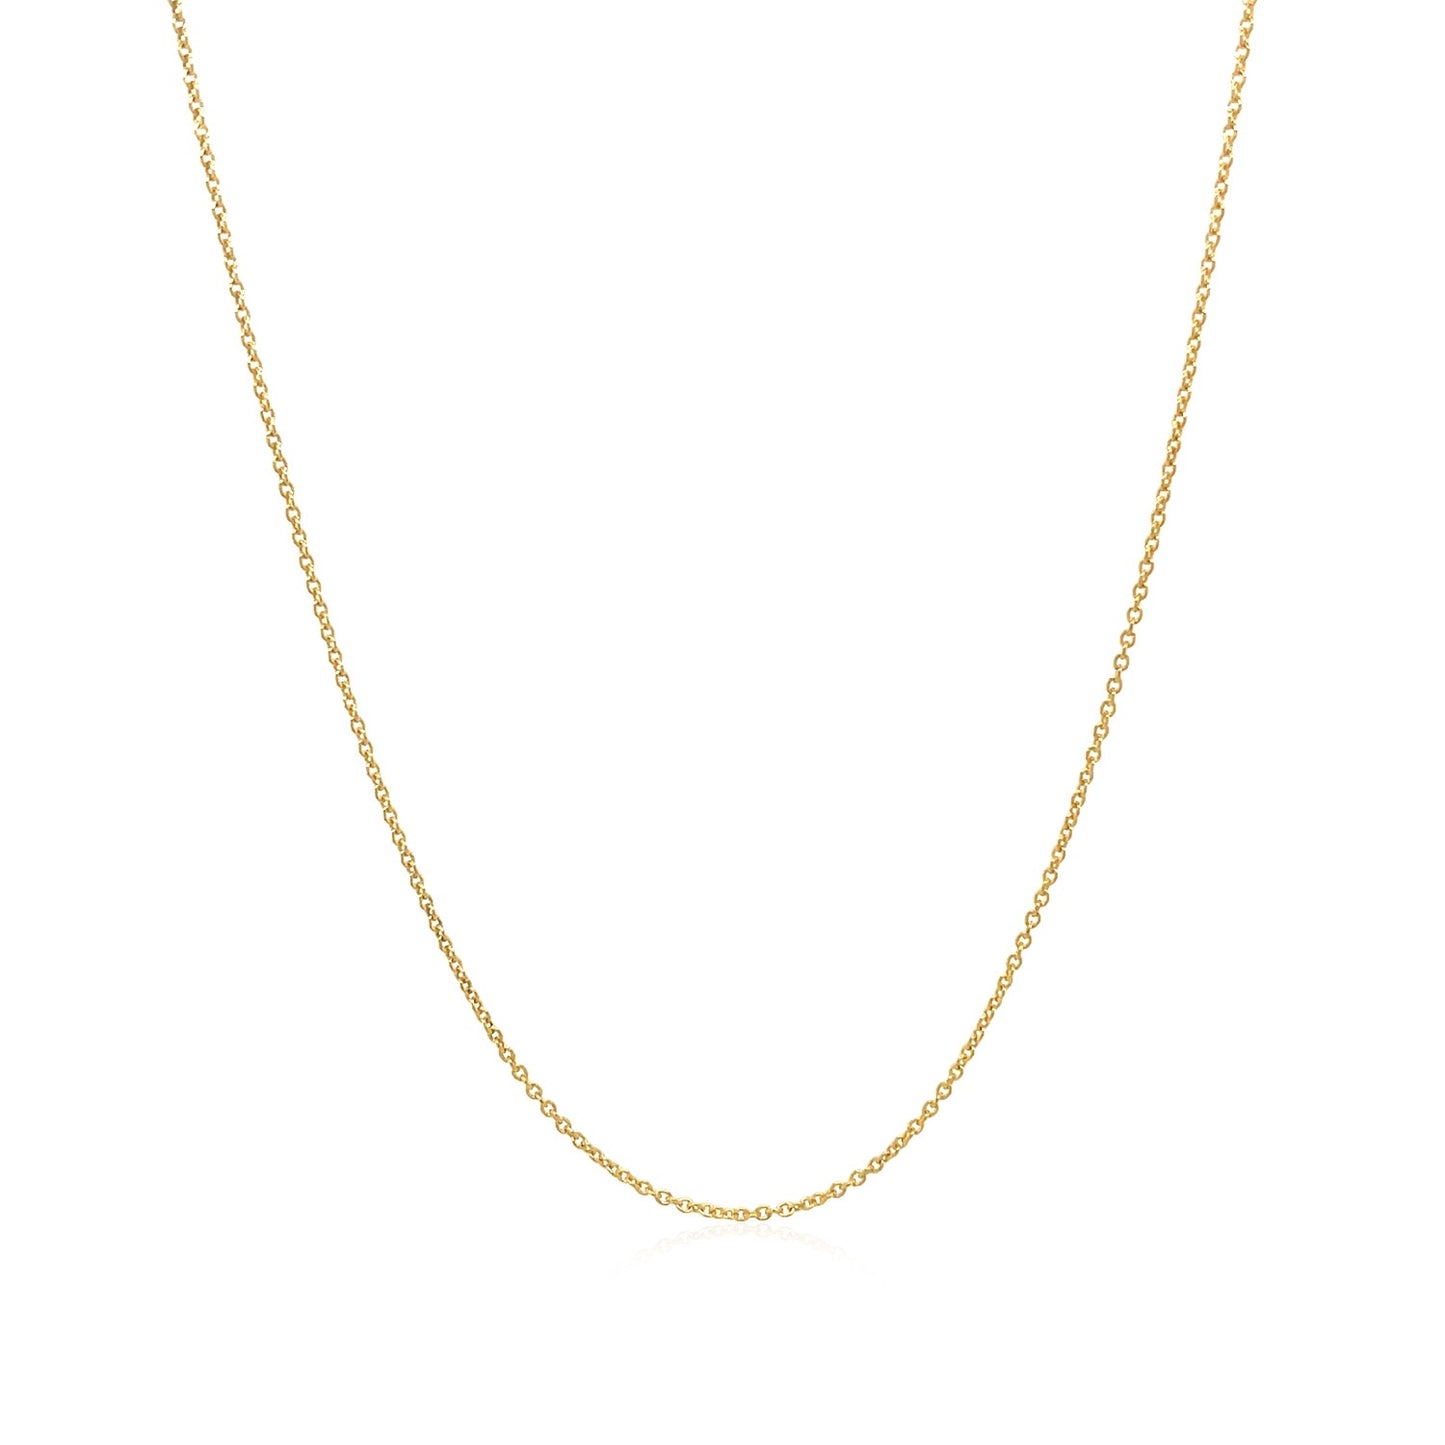 14k Yellow Gold Oval Cable Link Chain 0.6mm